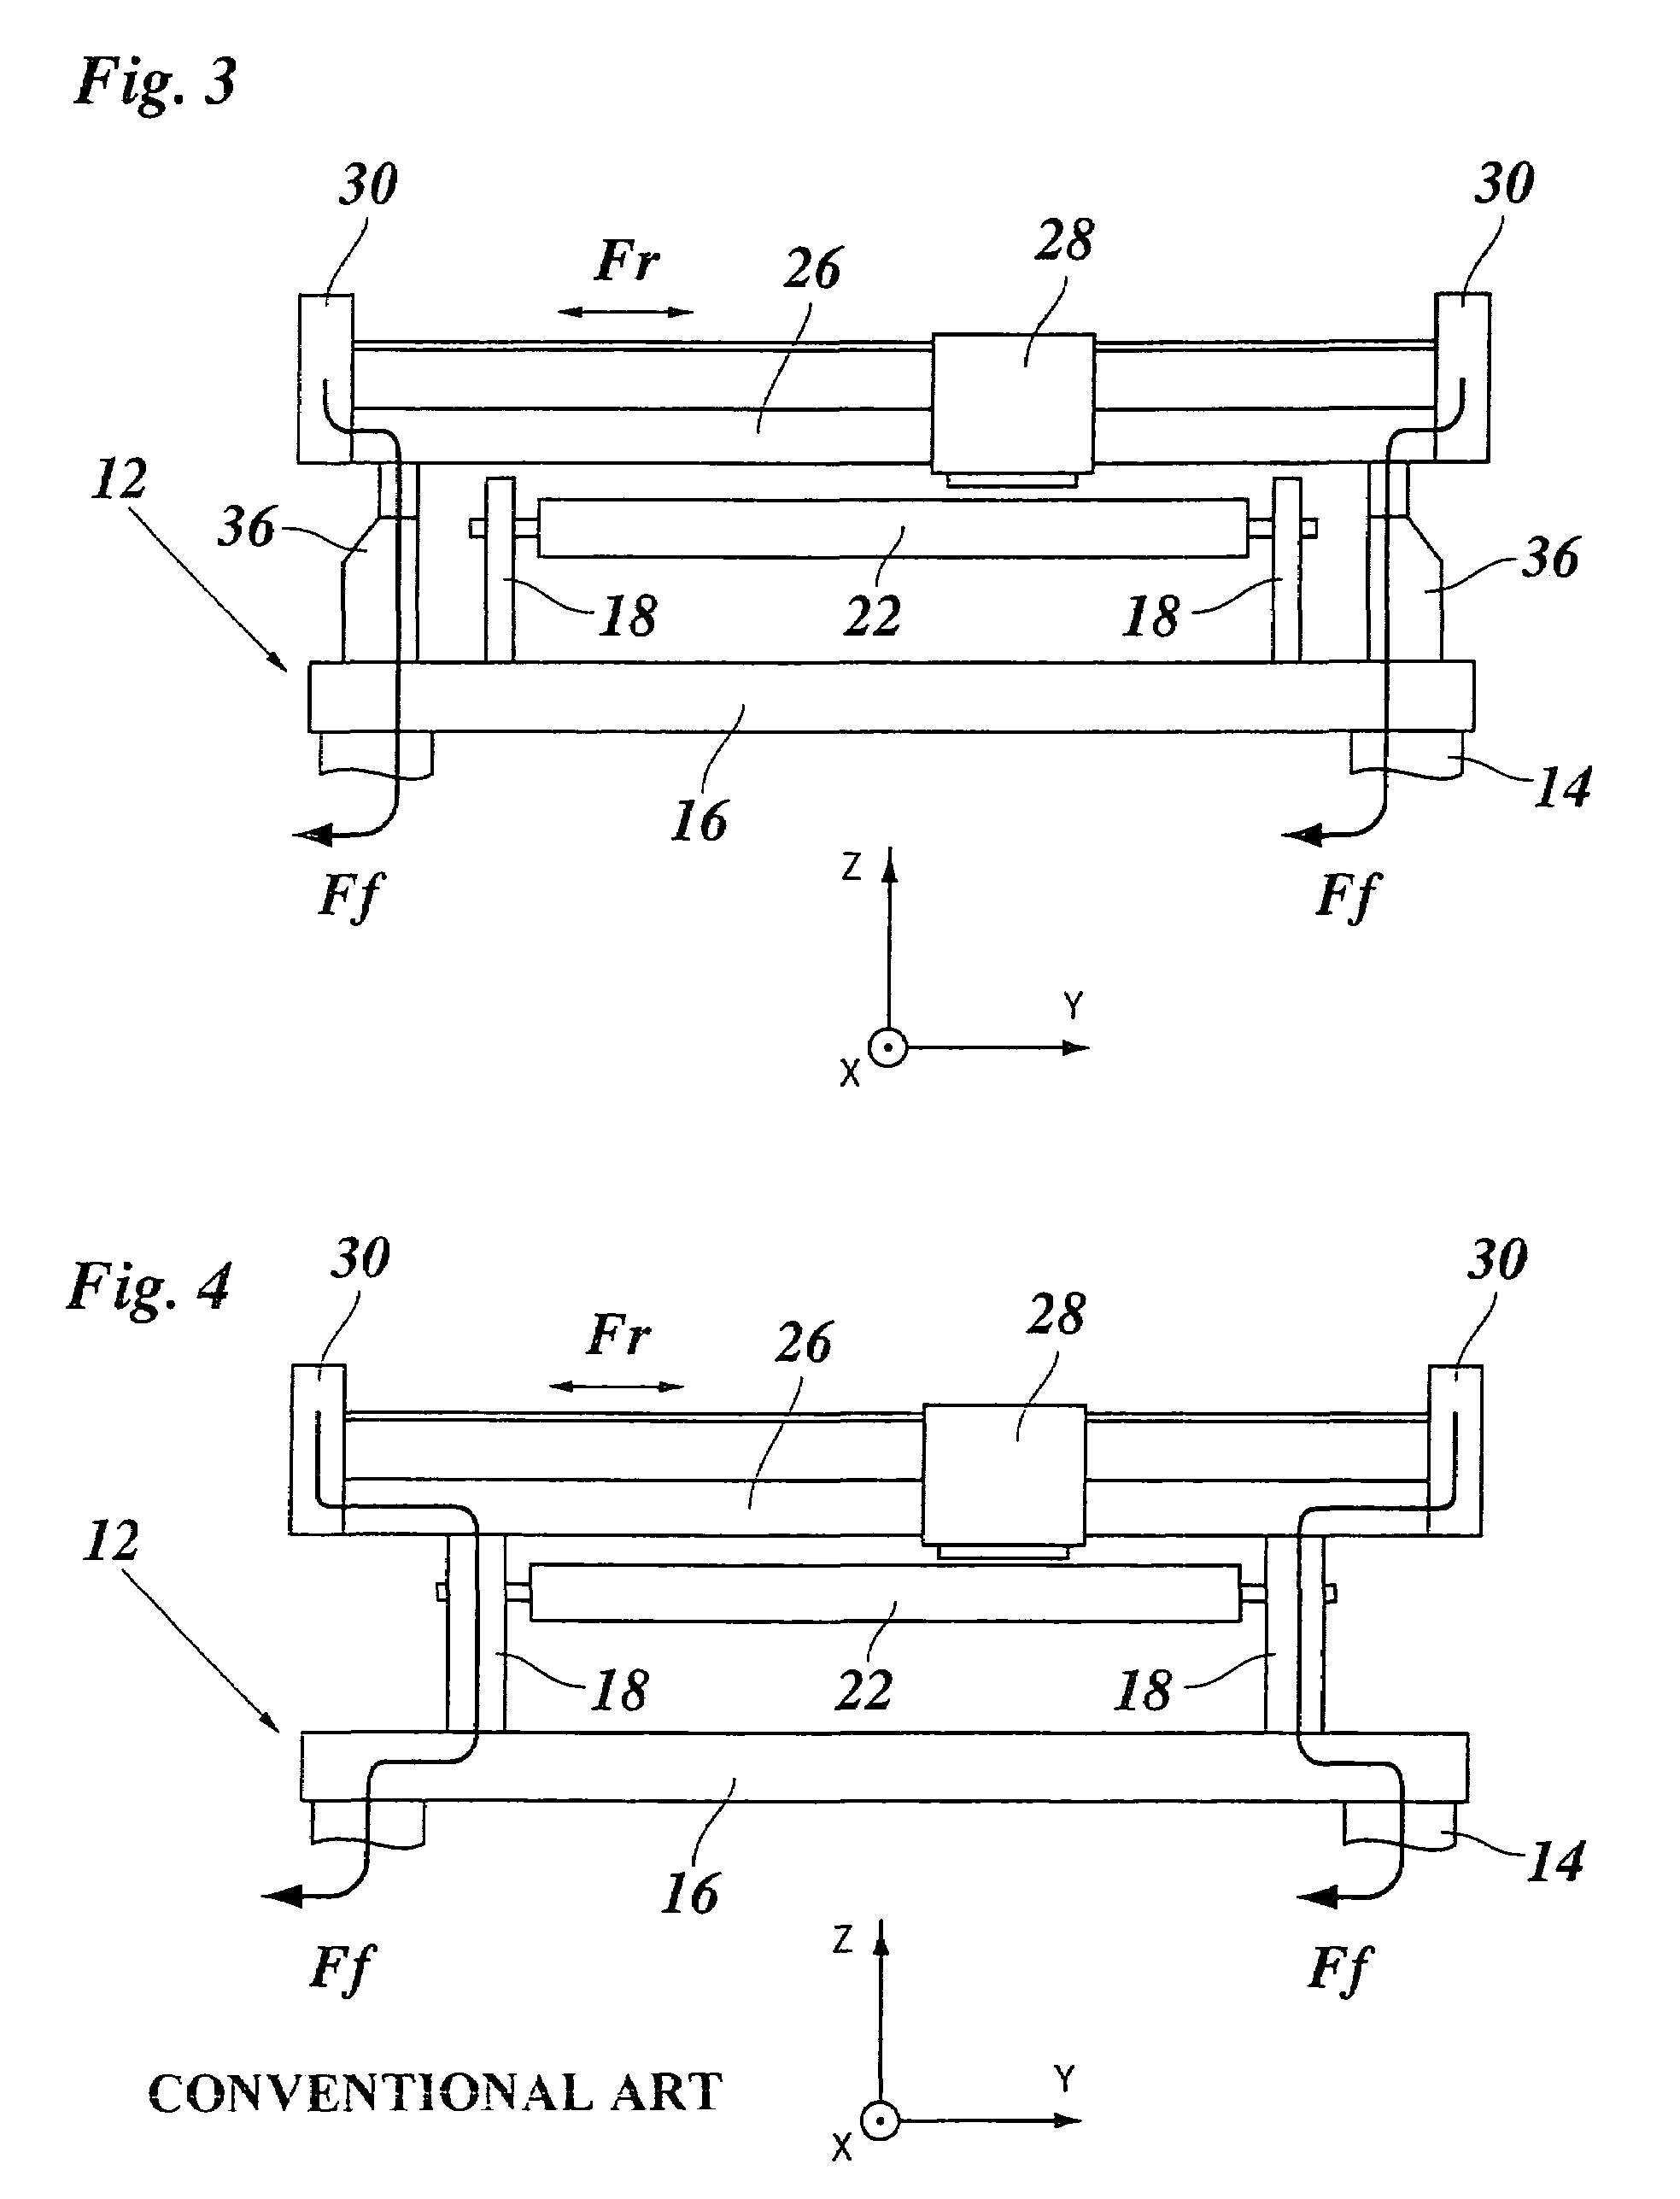 Printer with reciprocating carriage and a two-stage frame structure